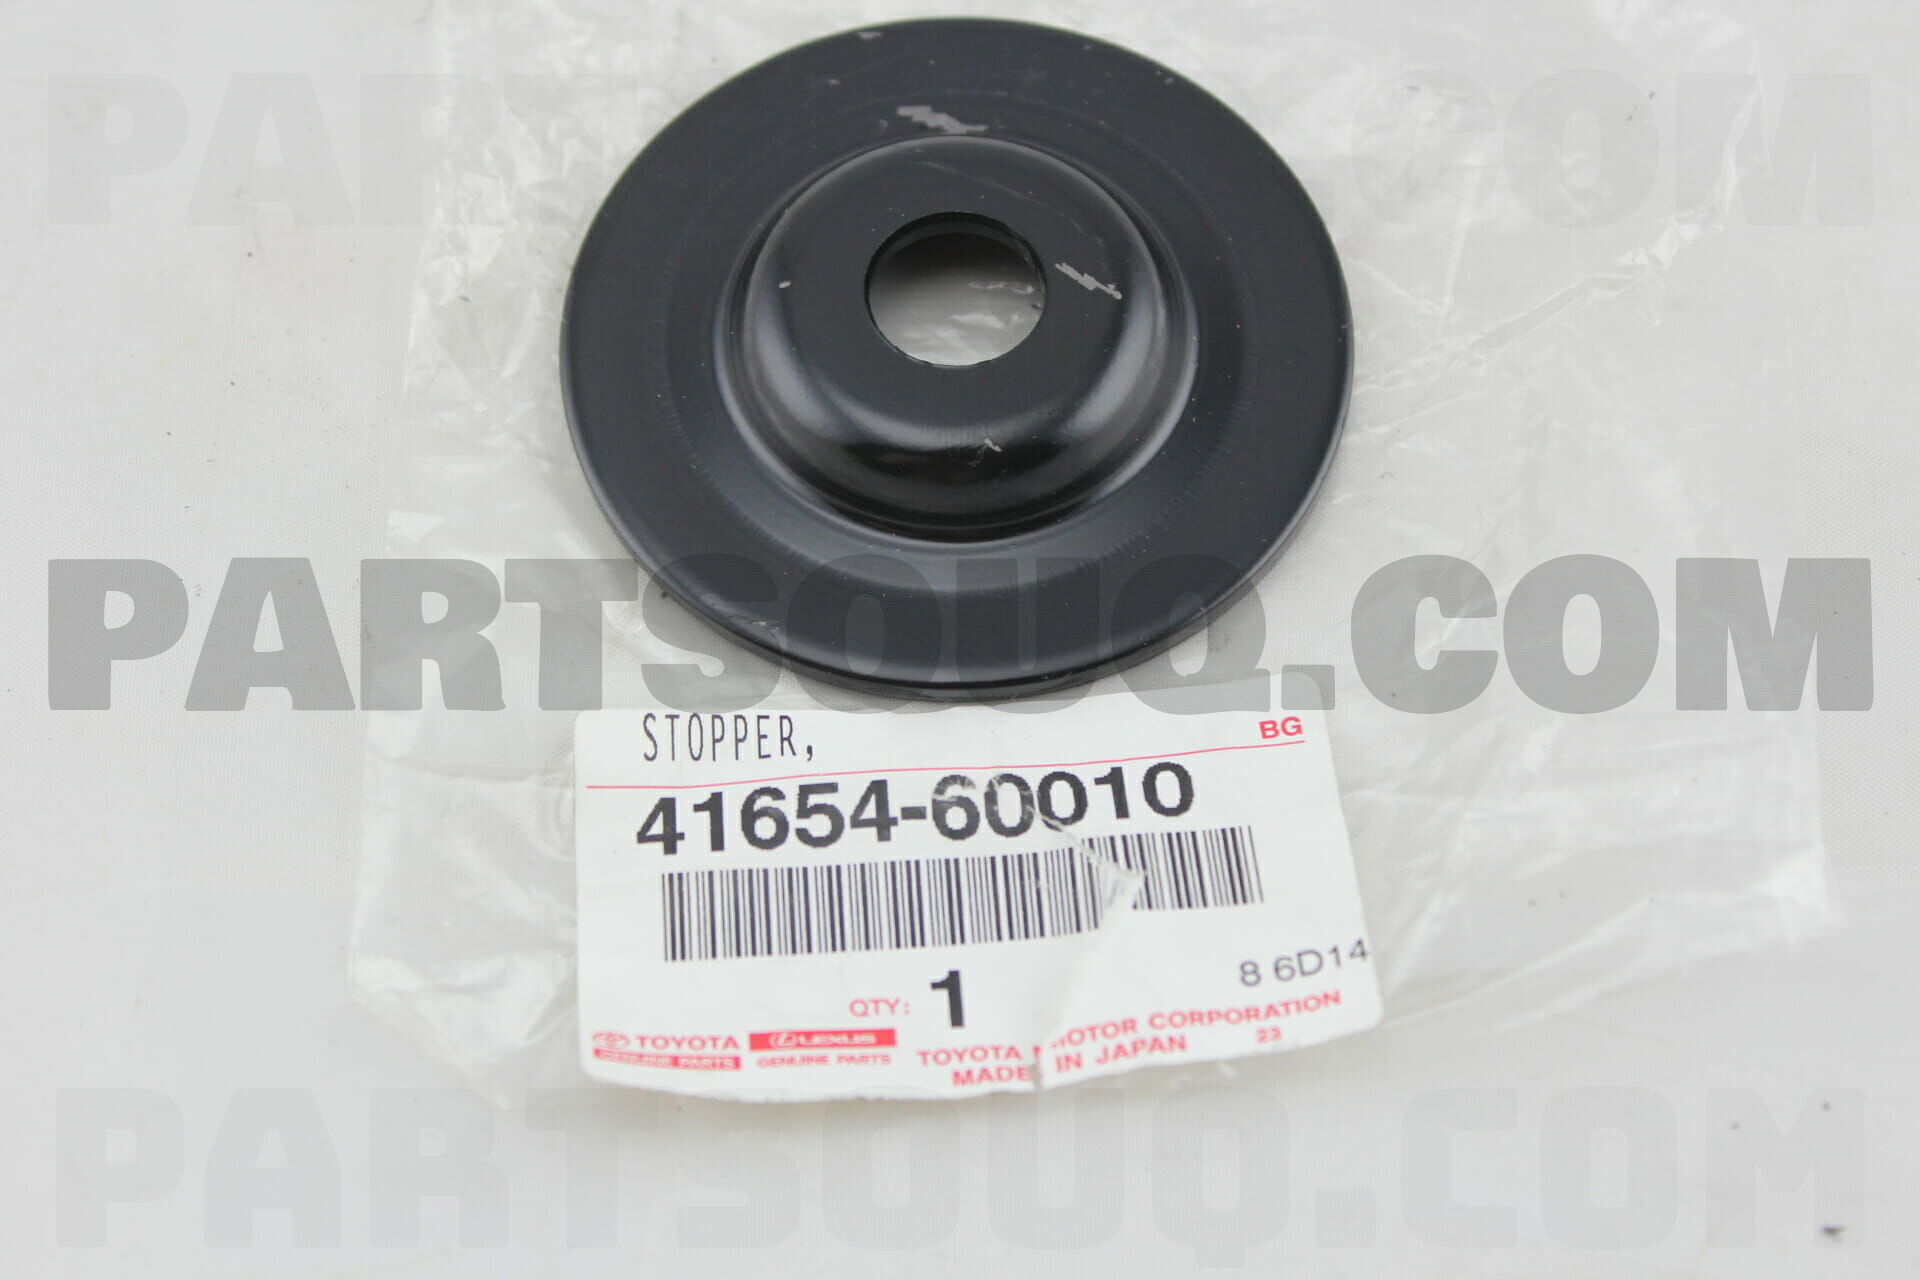 LOWER 41654-60010 OEM 4165460010 GENUINE Toyota STOPPER DIFFERENTIAL MOUNT